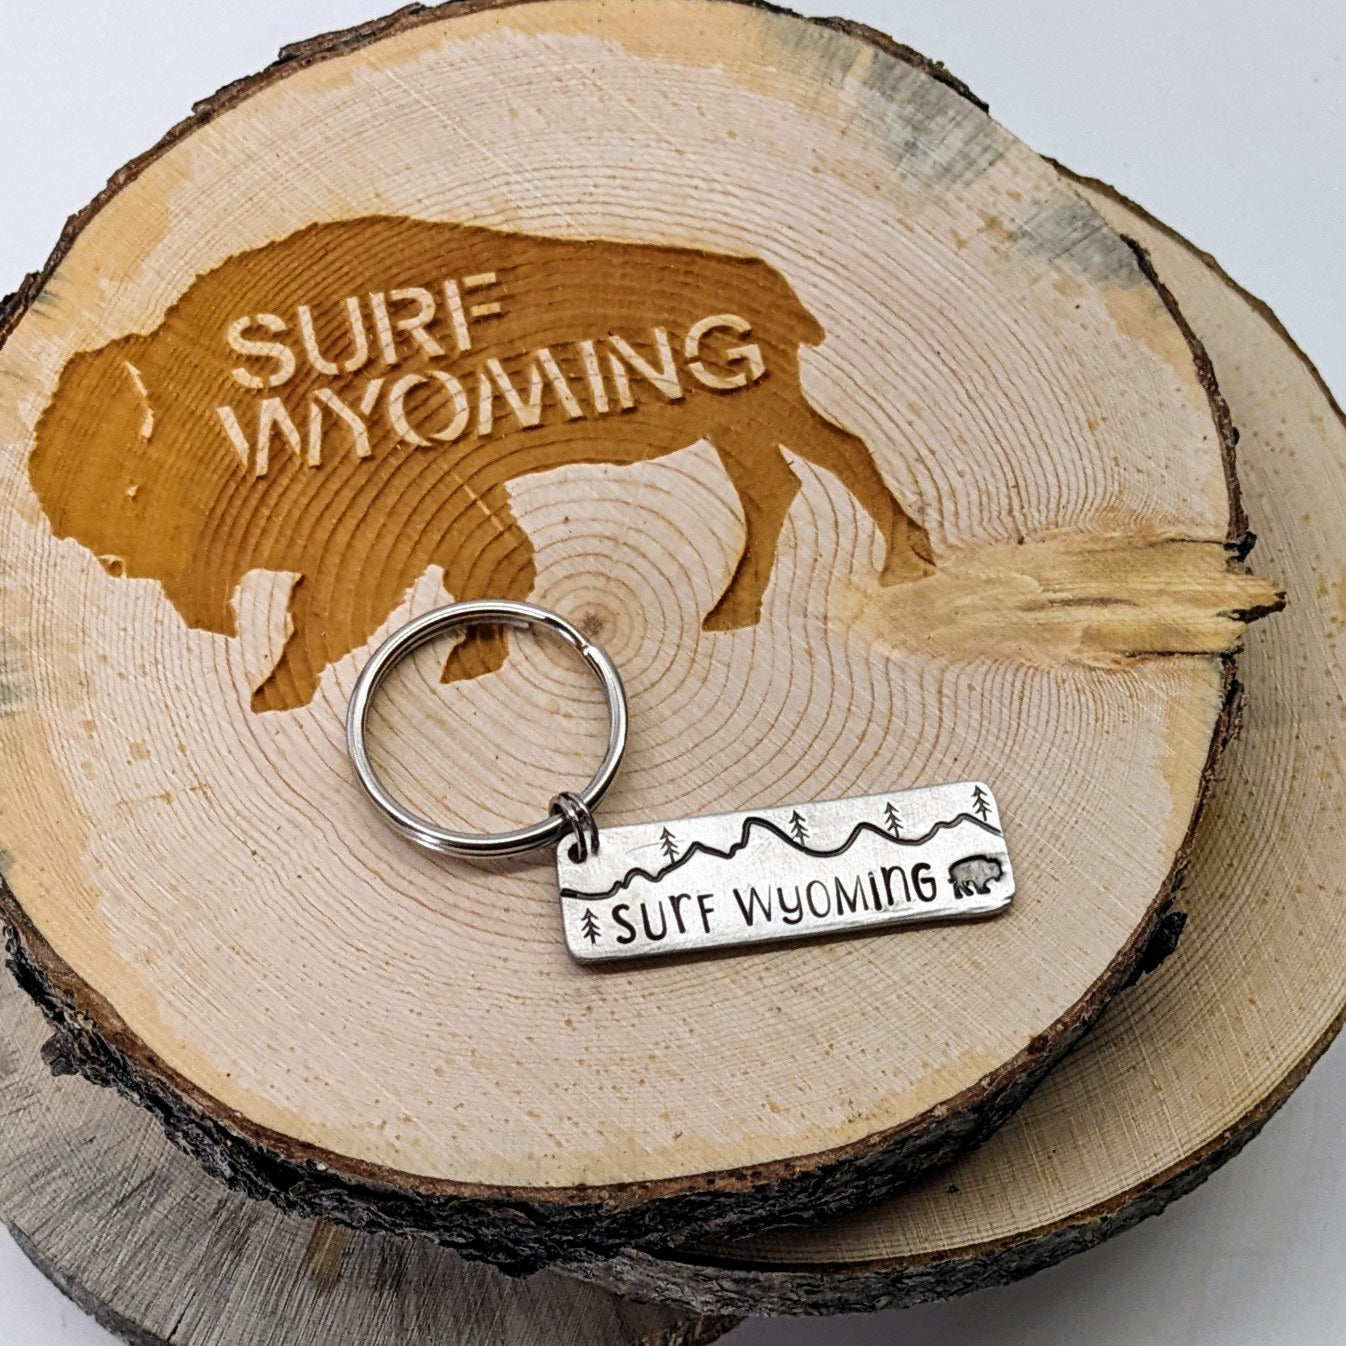 Surf Wyoming® Bison Pewter Keychain - *Made to order*